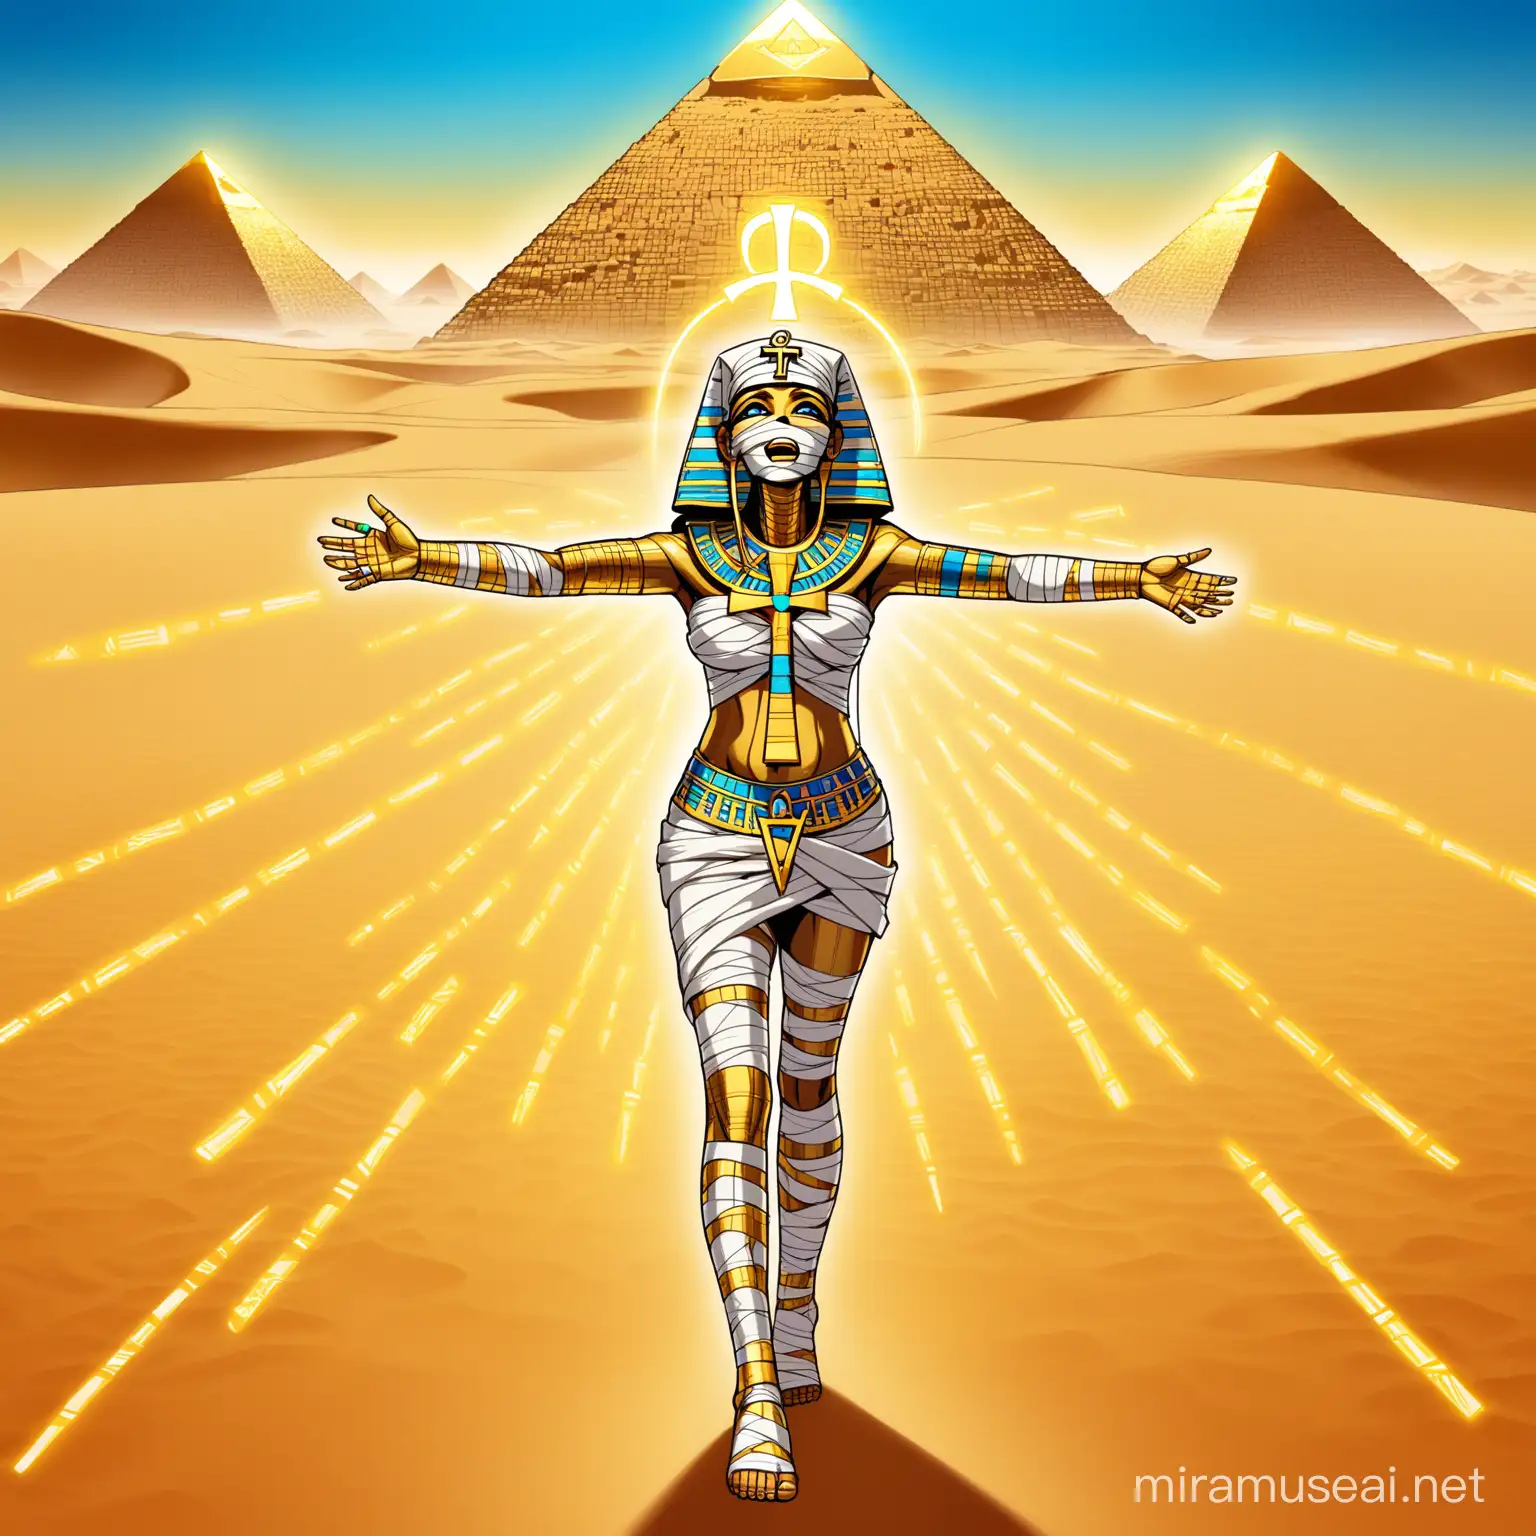 mummy with gold-ankh 
appreance-full body/ neon gold/yellow/blue//bandages/open mouth(missing teeth)/eqyptian-runes/arm out stretched 
background-desert/sand/pyramid/